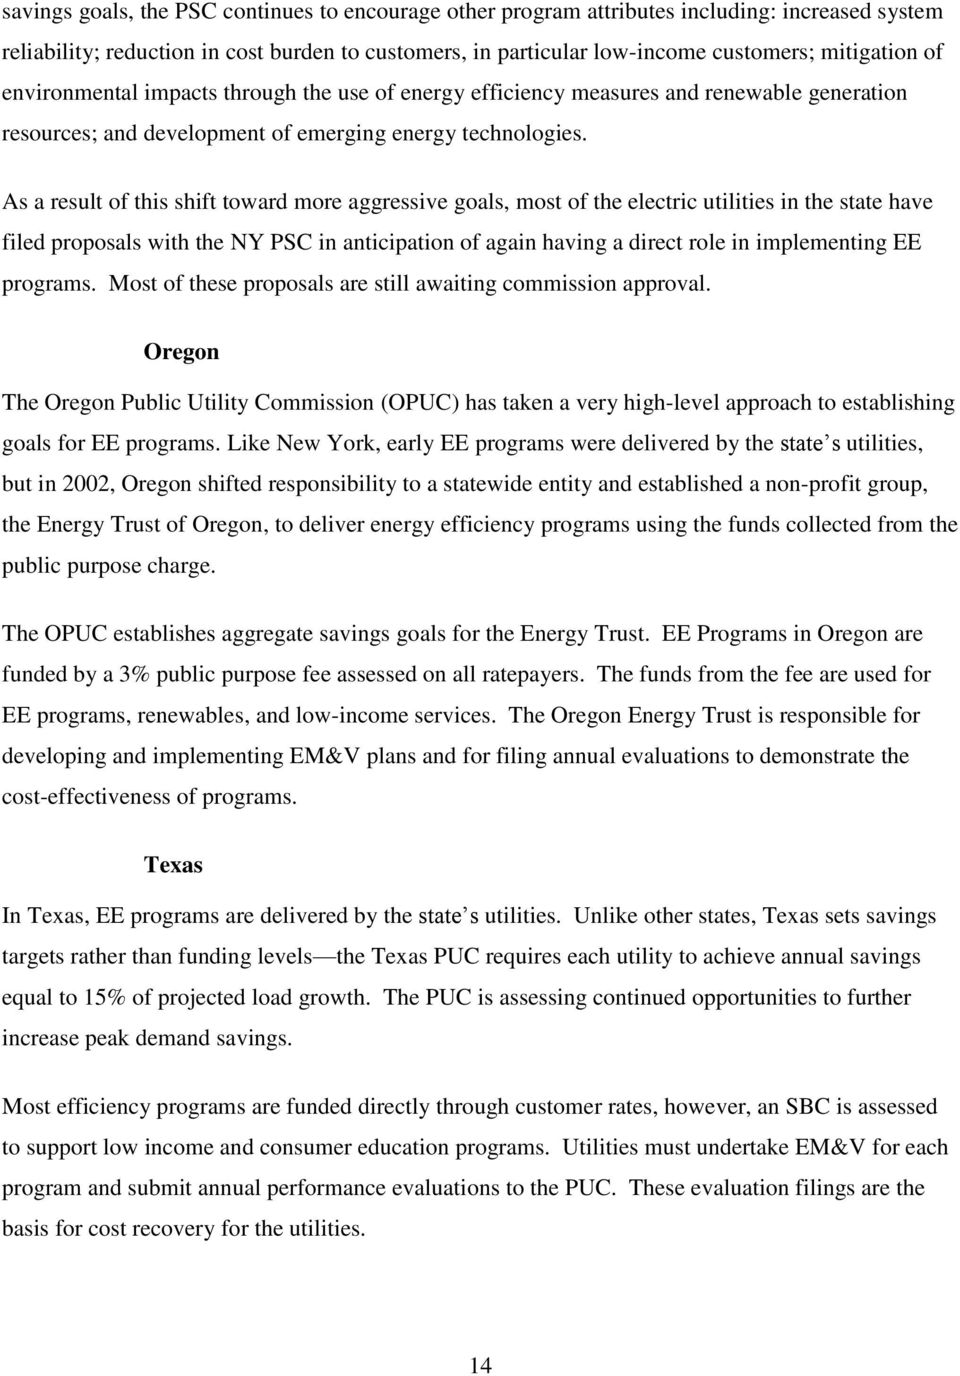 As a result of this shift toward more aggressive goals, most of the electric utilities in the state have filed proposals with the NY PSC in anticipation of again having a direct role in implementing